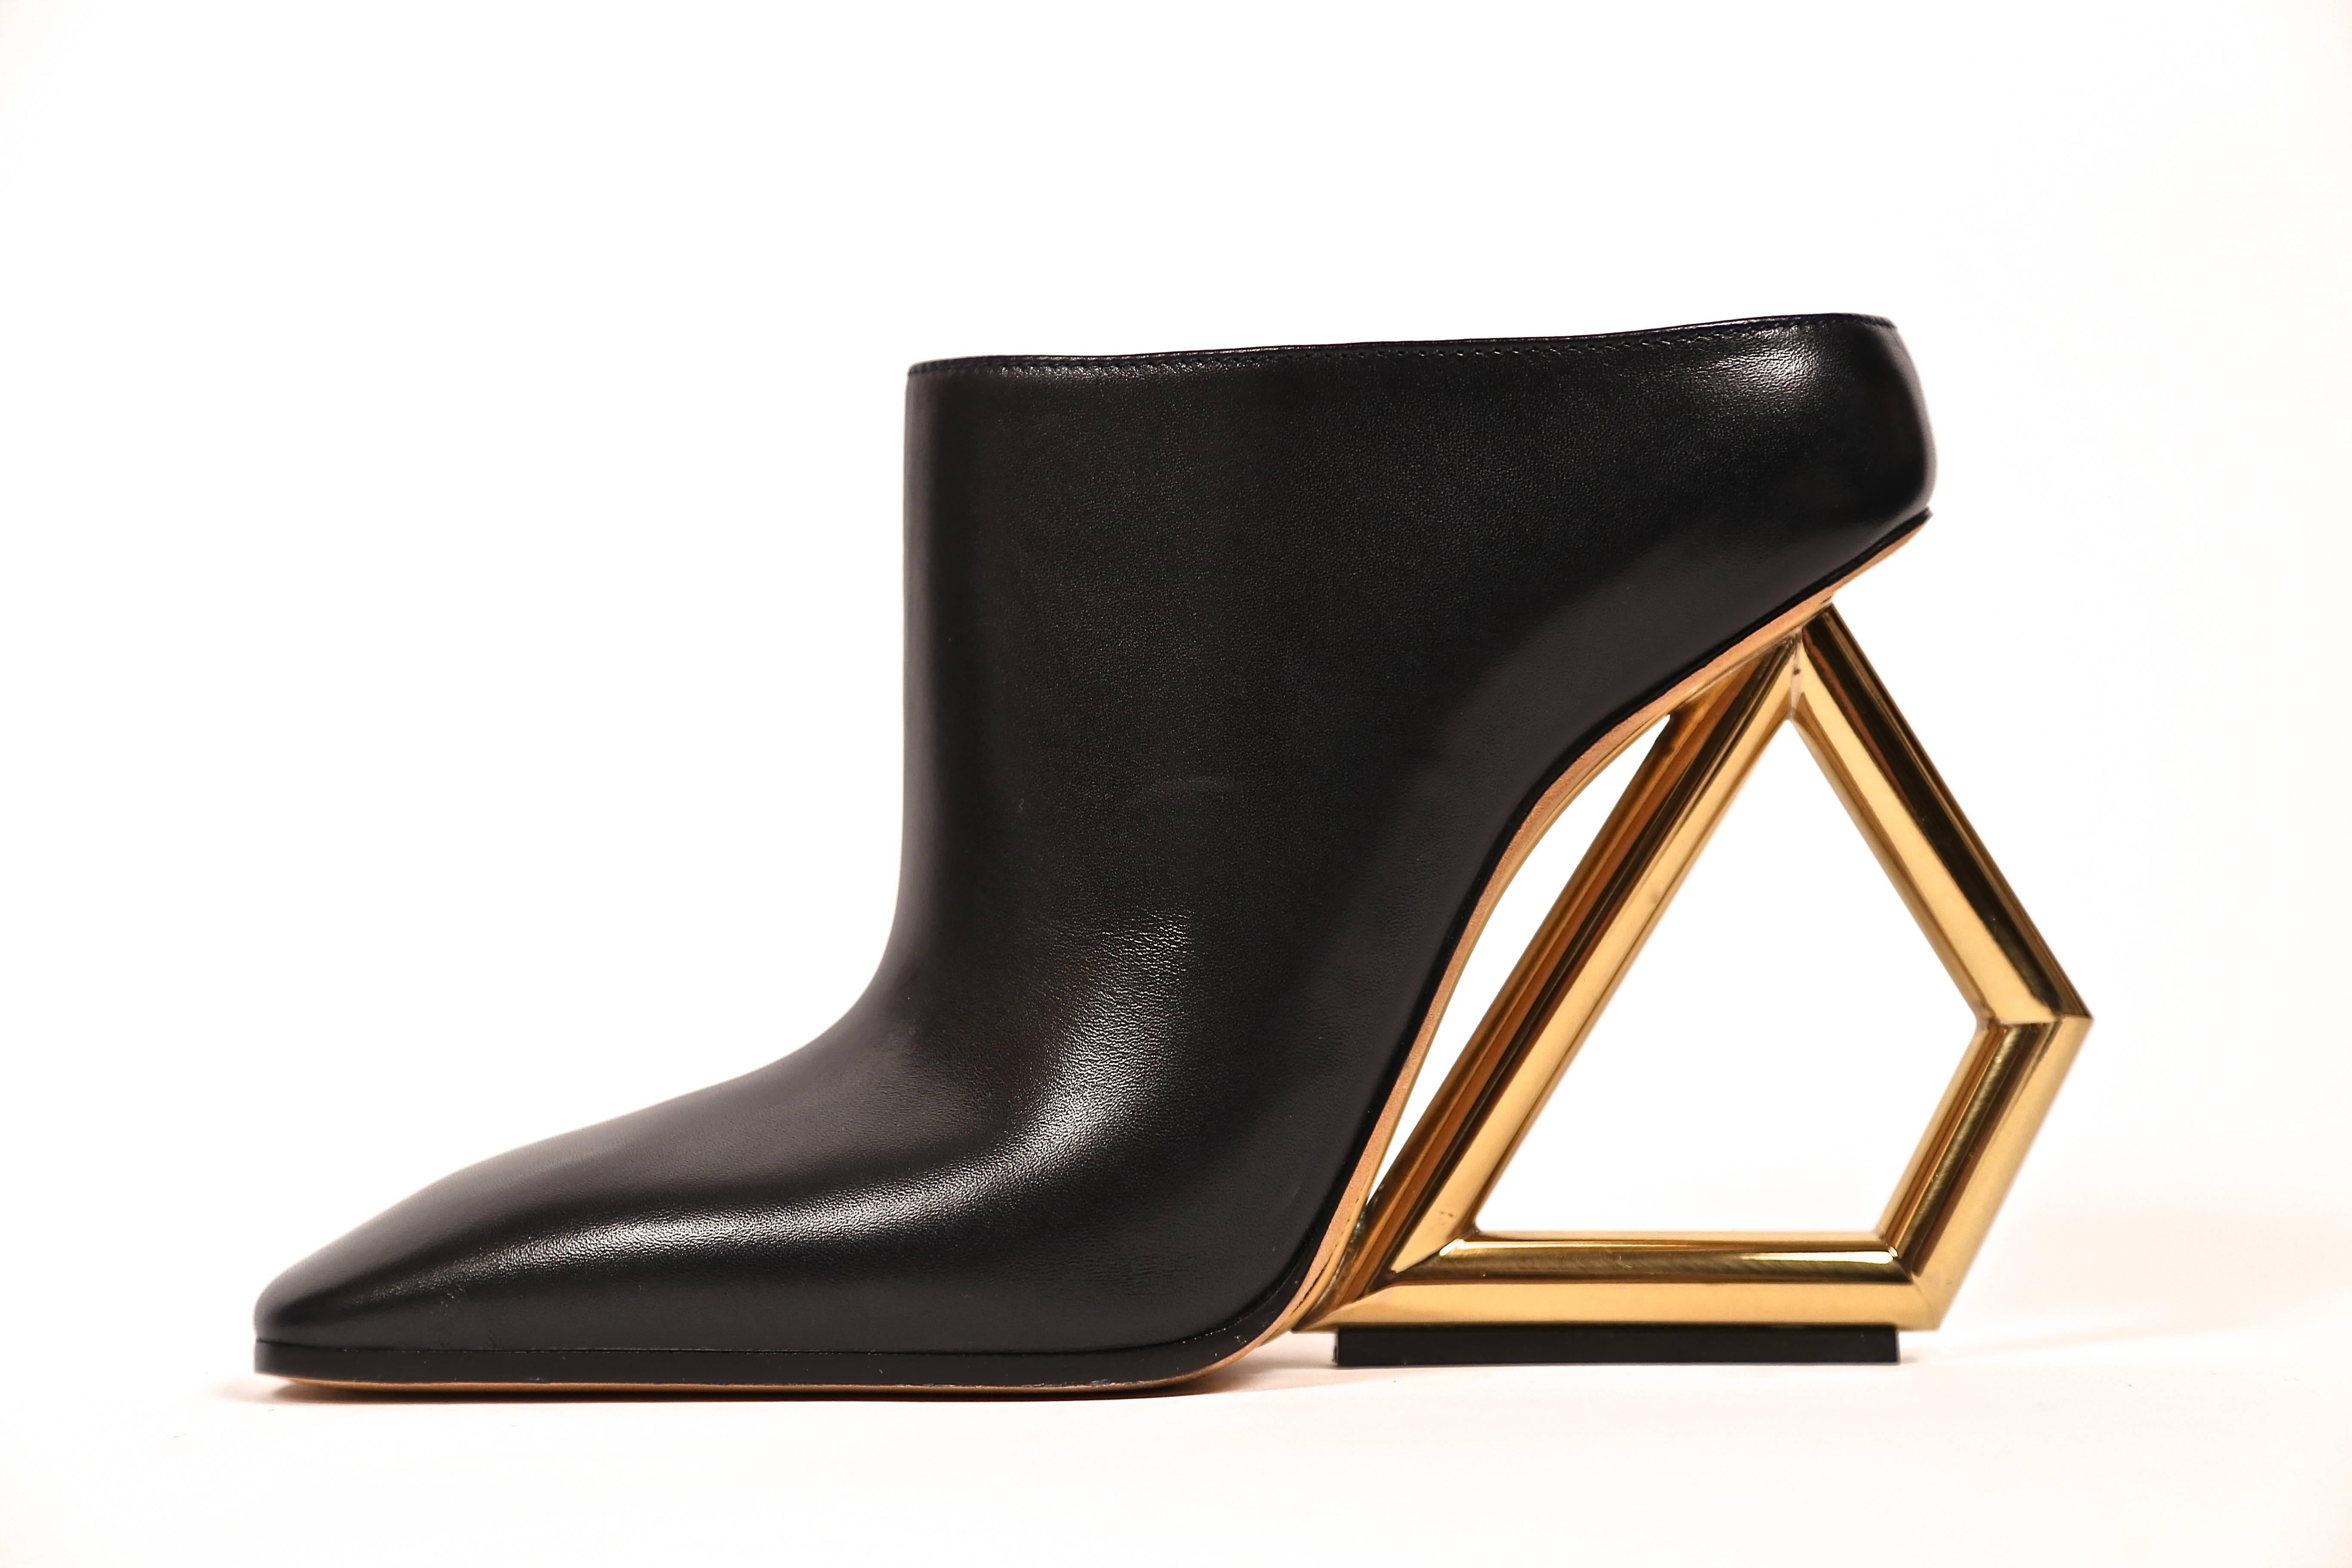 Unworn, black leather mules with gold toned trapezoid heels from Celine as seen on the runway in spring of 2014. French size 39. Insoles measure approximately just under 10.5